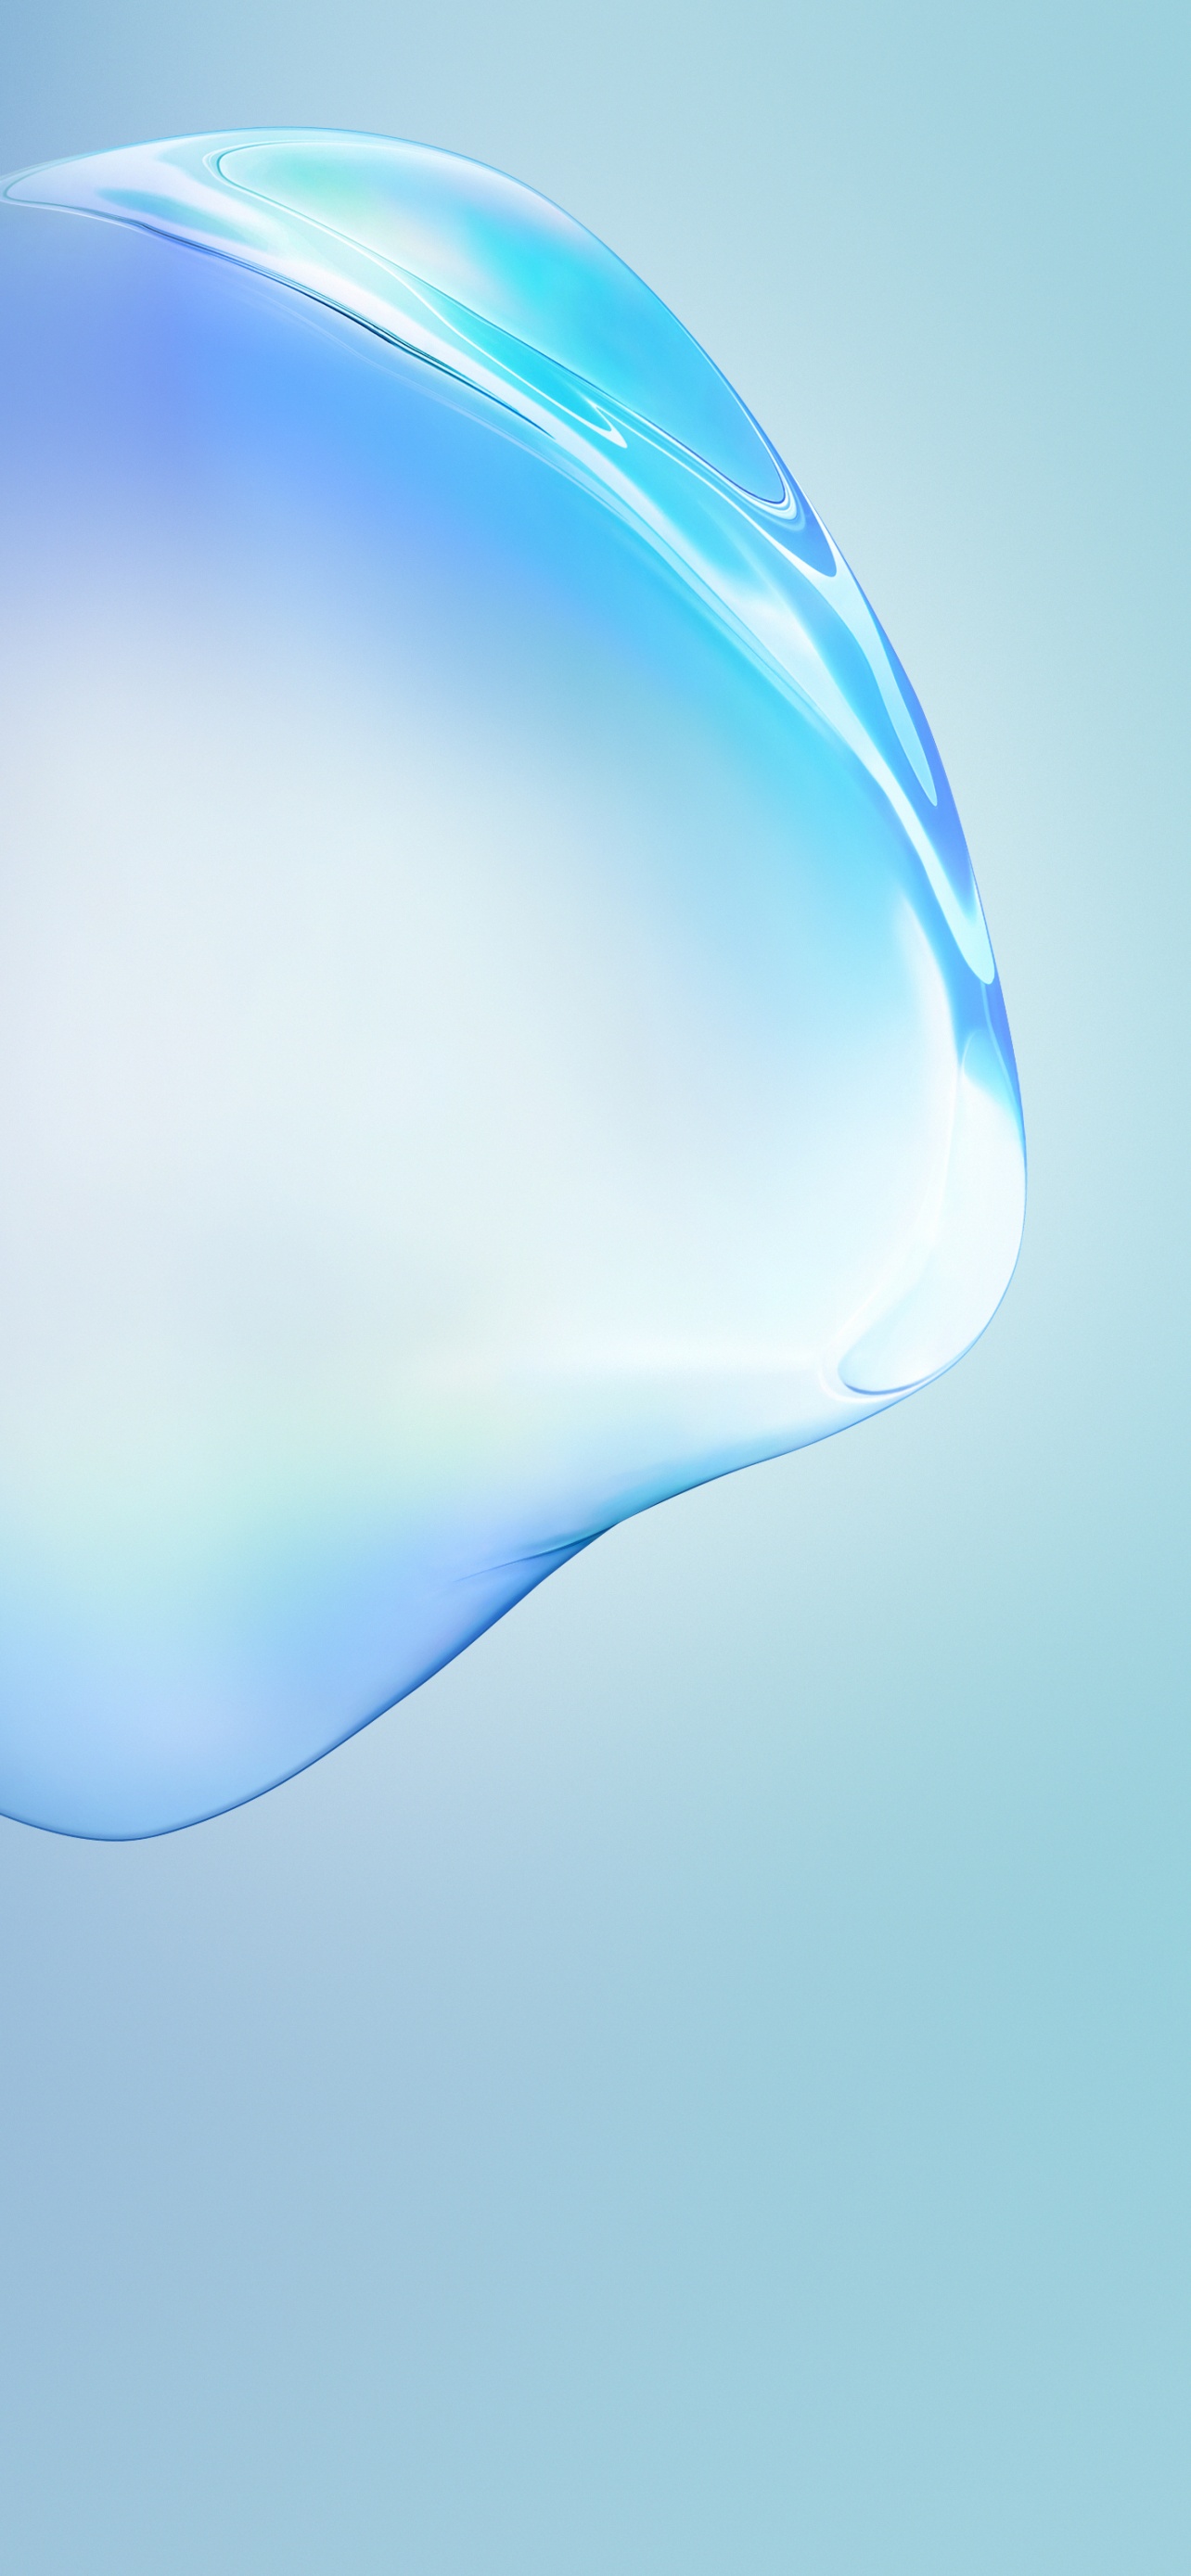 Samsung Galaxy Note10 Wallpaper 4k Bubble Blue Stock Android 10 Abstract 730